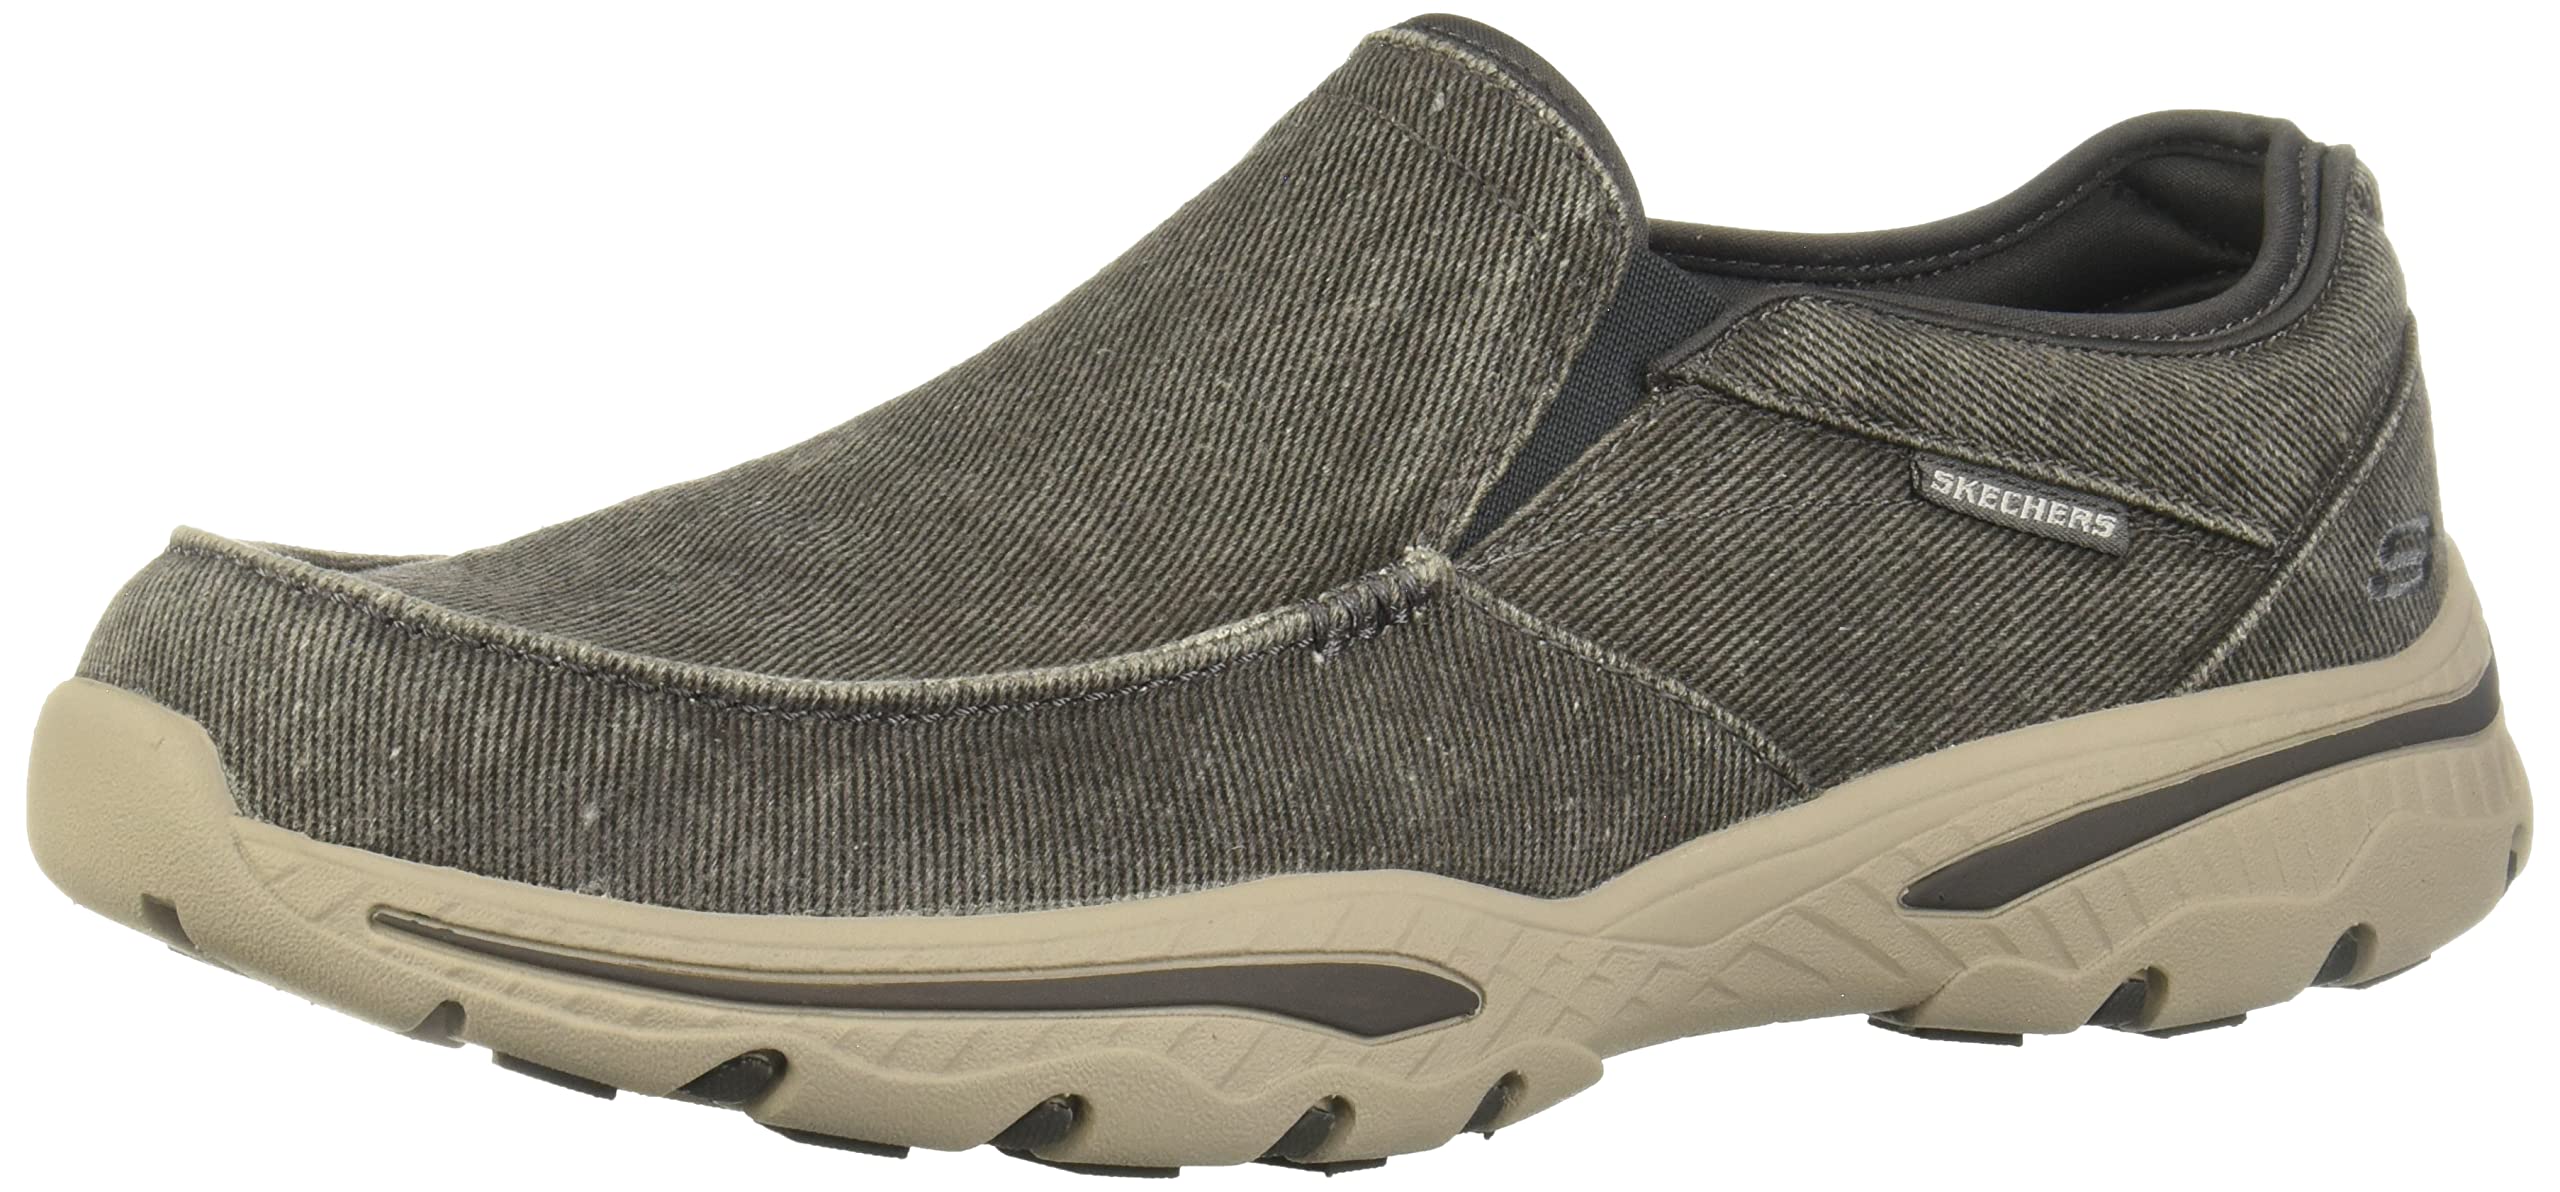 Skechers Men's Relaxed Fit Creston Moseco Shoes (limited sizes) $20 + free shipping w/ Prime or on orders over $25